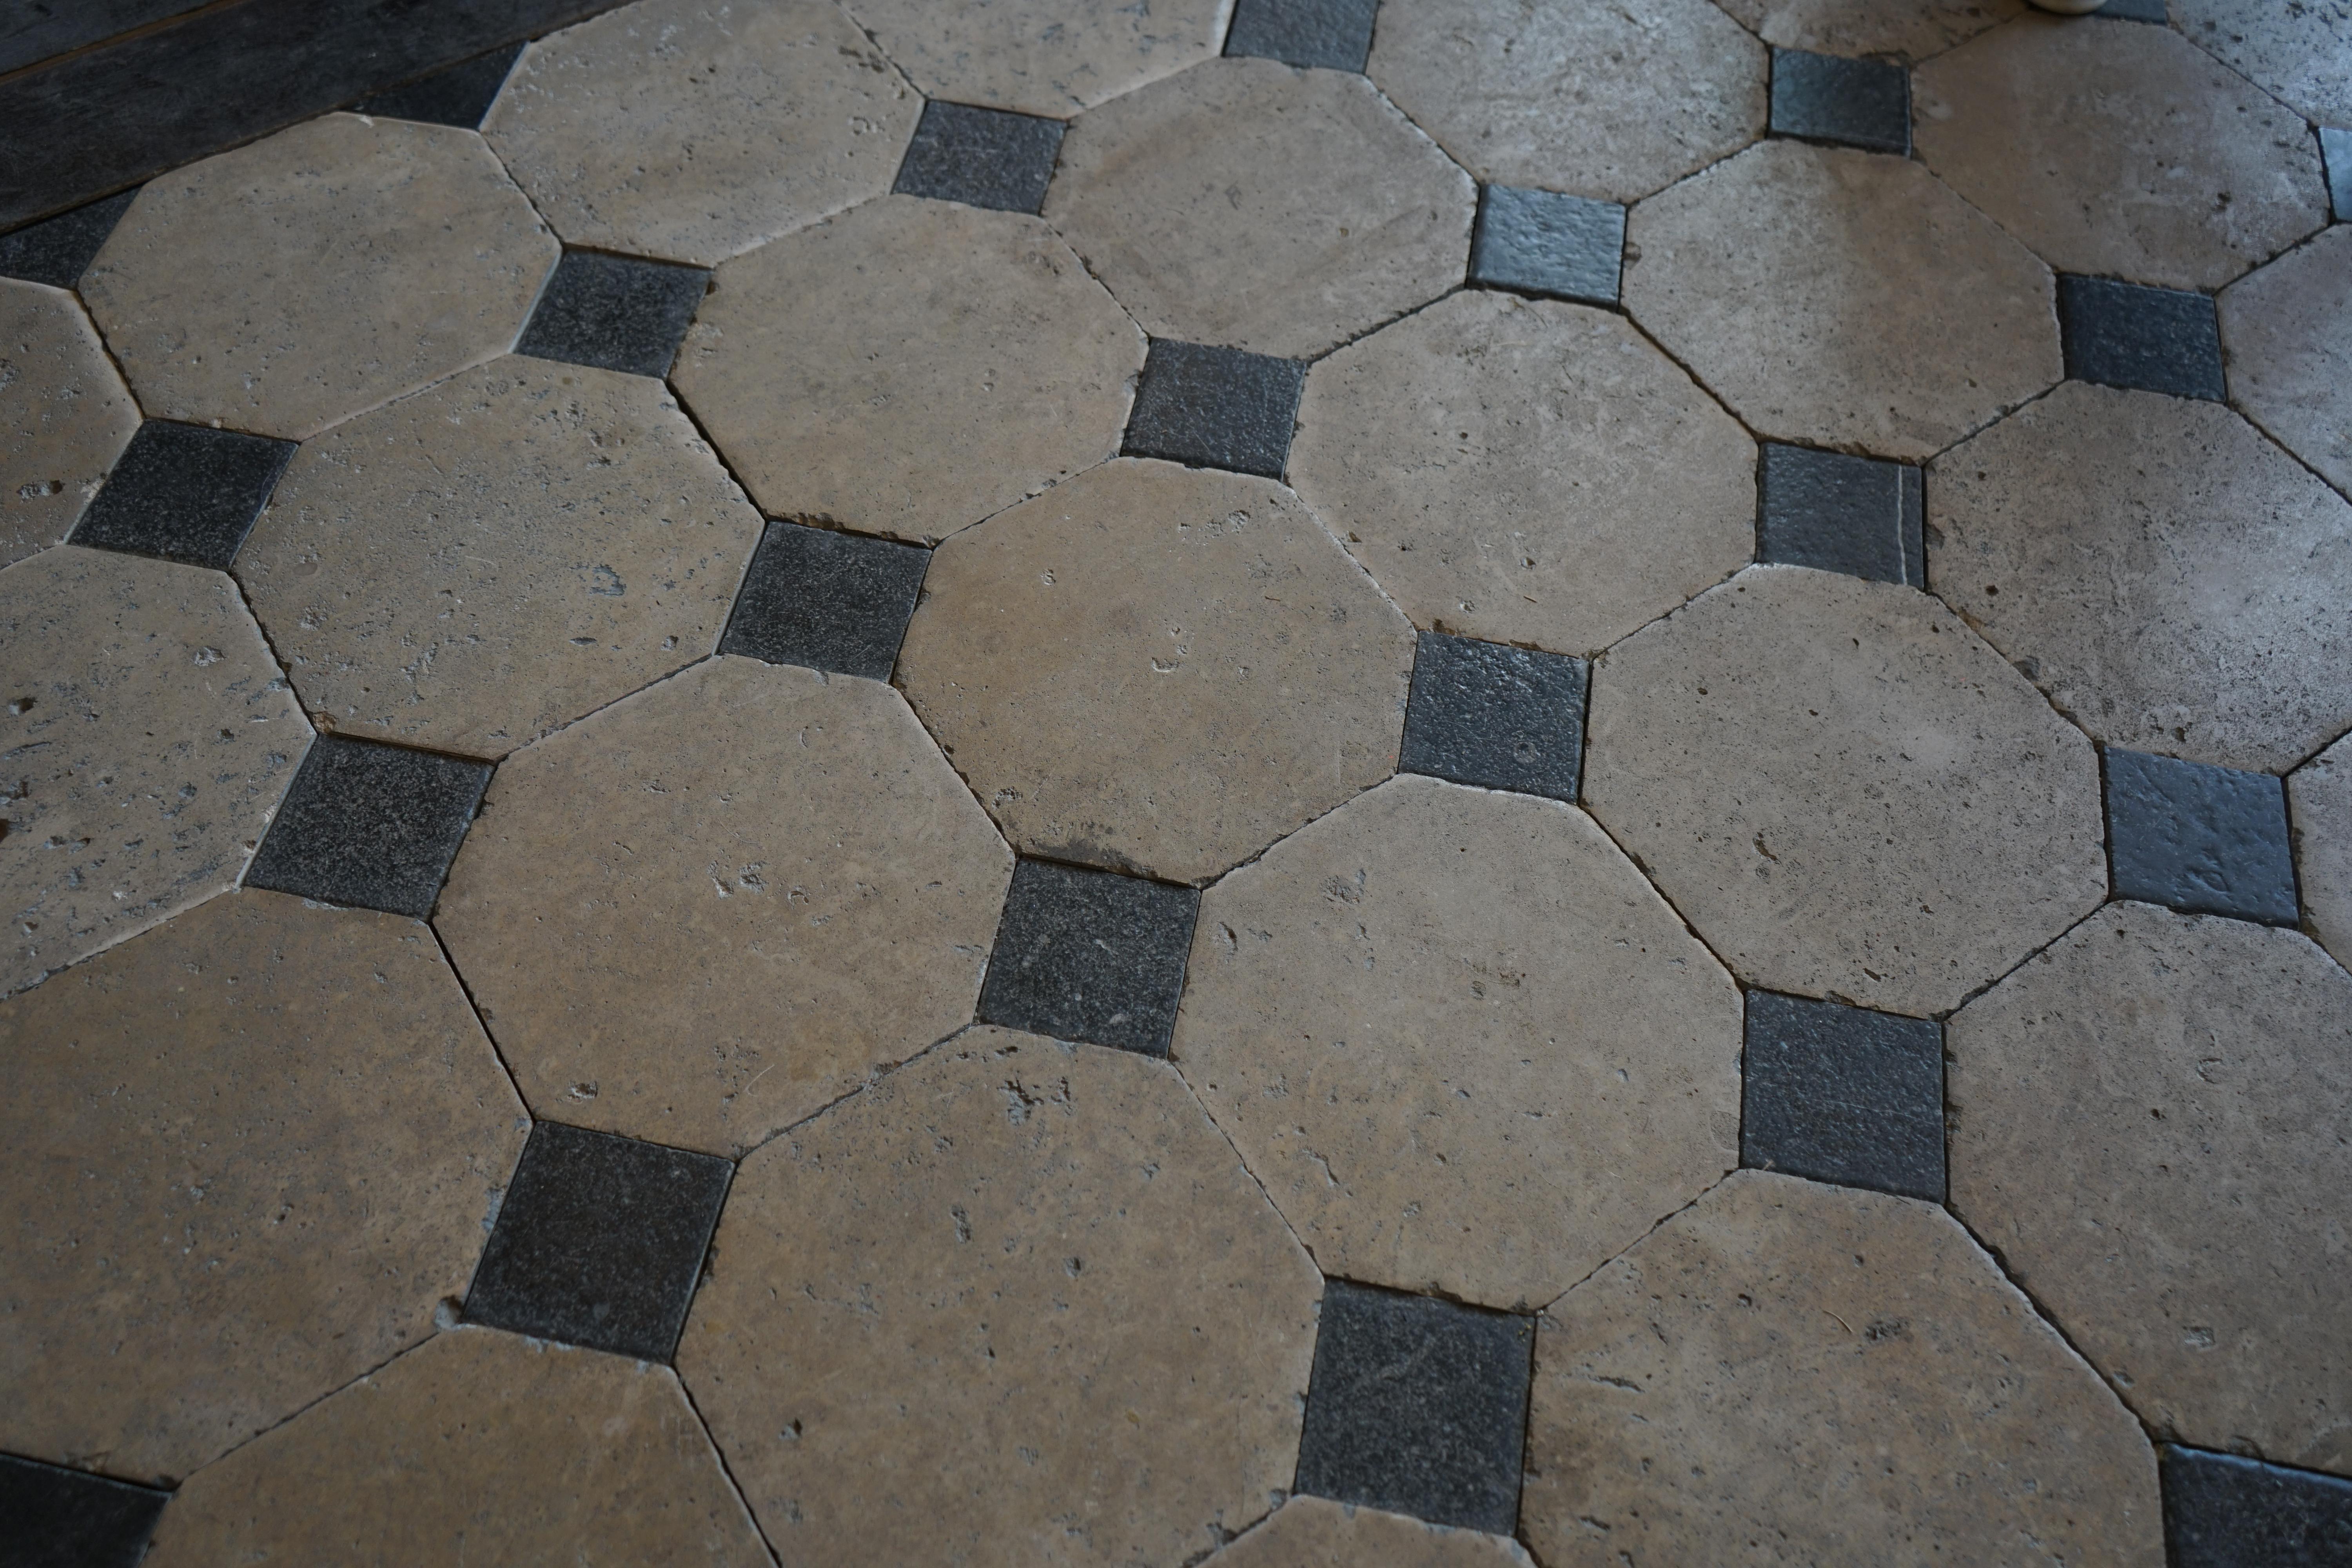 Classically French, this black and white limestone flooring is what one might find in a grand chateau or manor house in Europe. This style of French flooring dates circa 1750s, these octagonal tiles lay together to create a unique floor arrangement